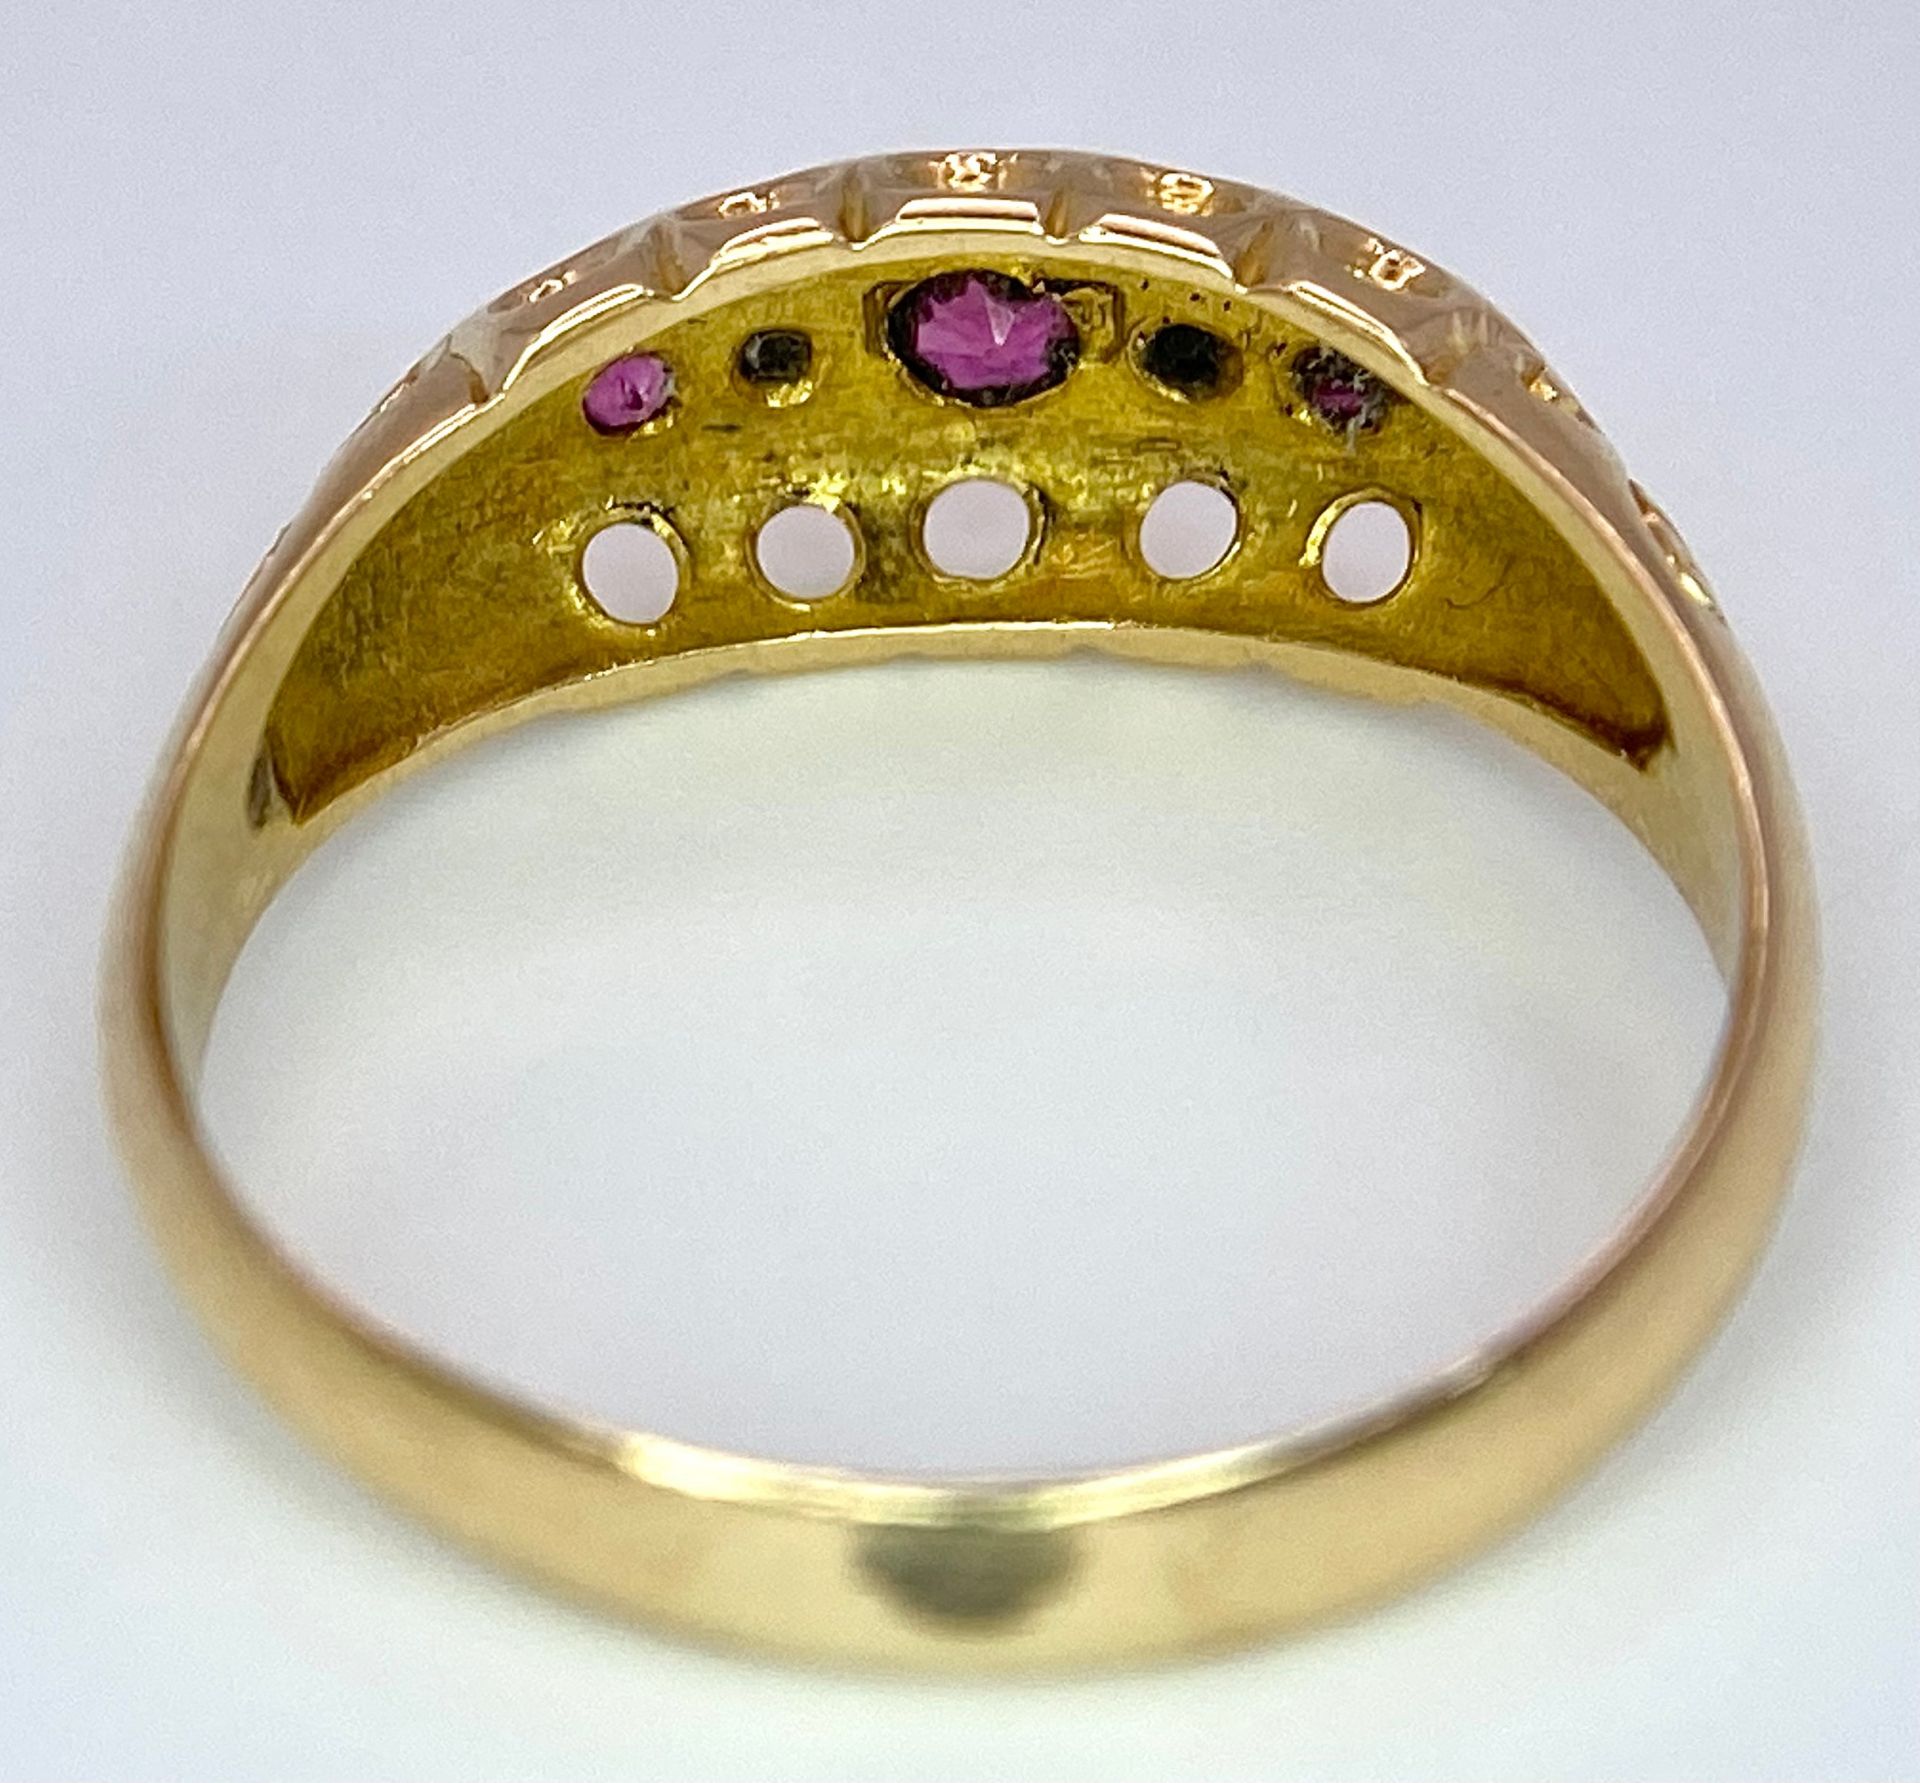 A 18K YELLOW GOLD ANTIQUE DIAMOND & RUBY RING 2.3G SIZE L HALLMARKED CHESTER 1729 A/S 1040 - 2 - Image 5 of 6